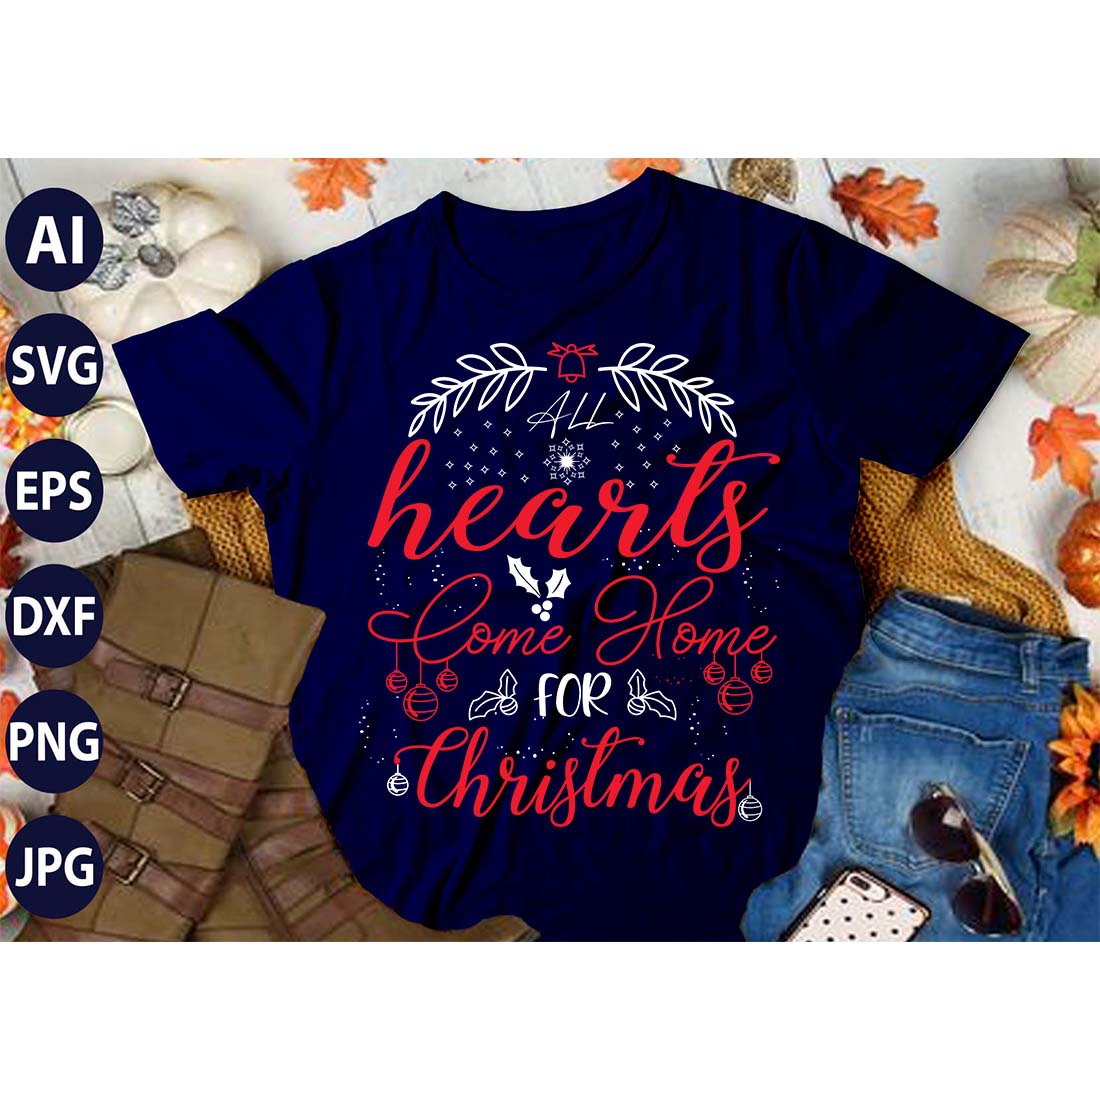 All Hearts Come Home For Christmas, SVG T-Shirt Design |Christmas Retro It's All About Jesus Typography Tshirt Design | Ai, Svg, Eps, Dxf, Jpeg, Png, Instant download T-Shirt | 100% print-ready Digital vector file cover image.